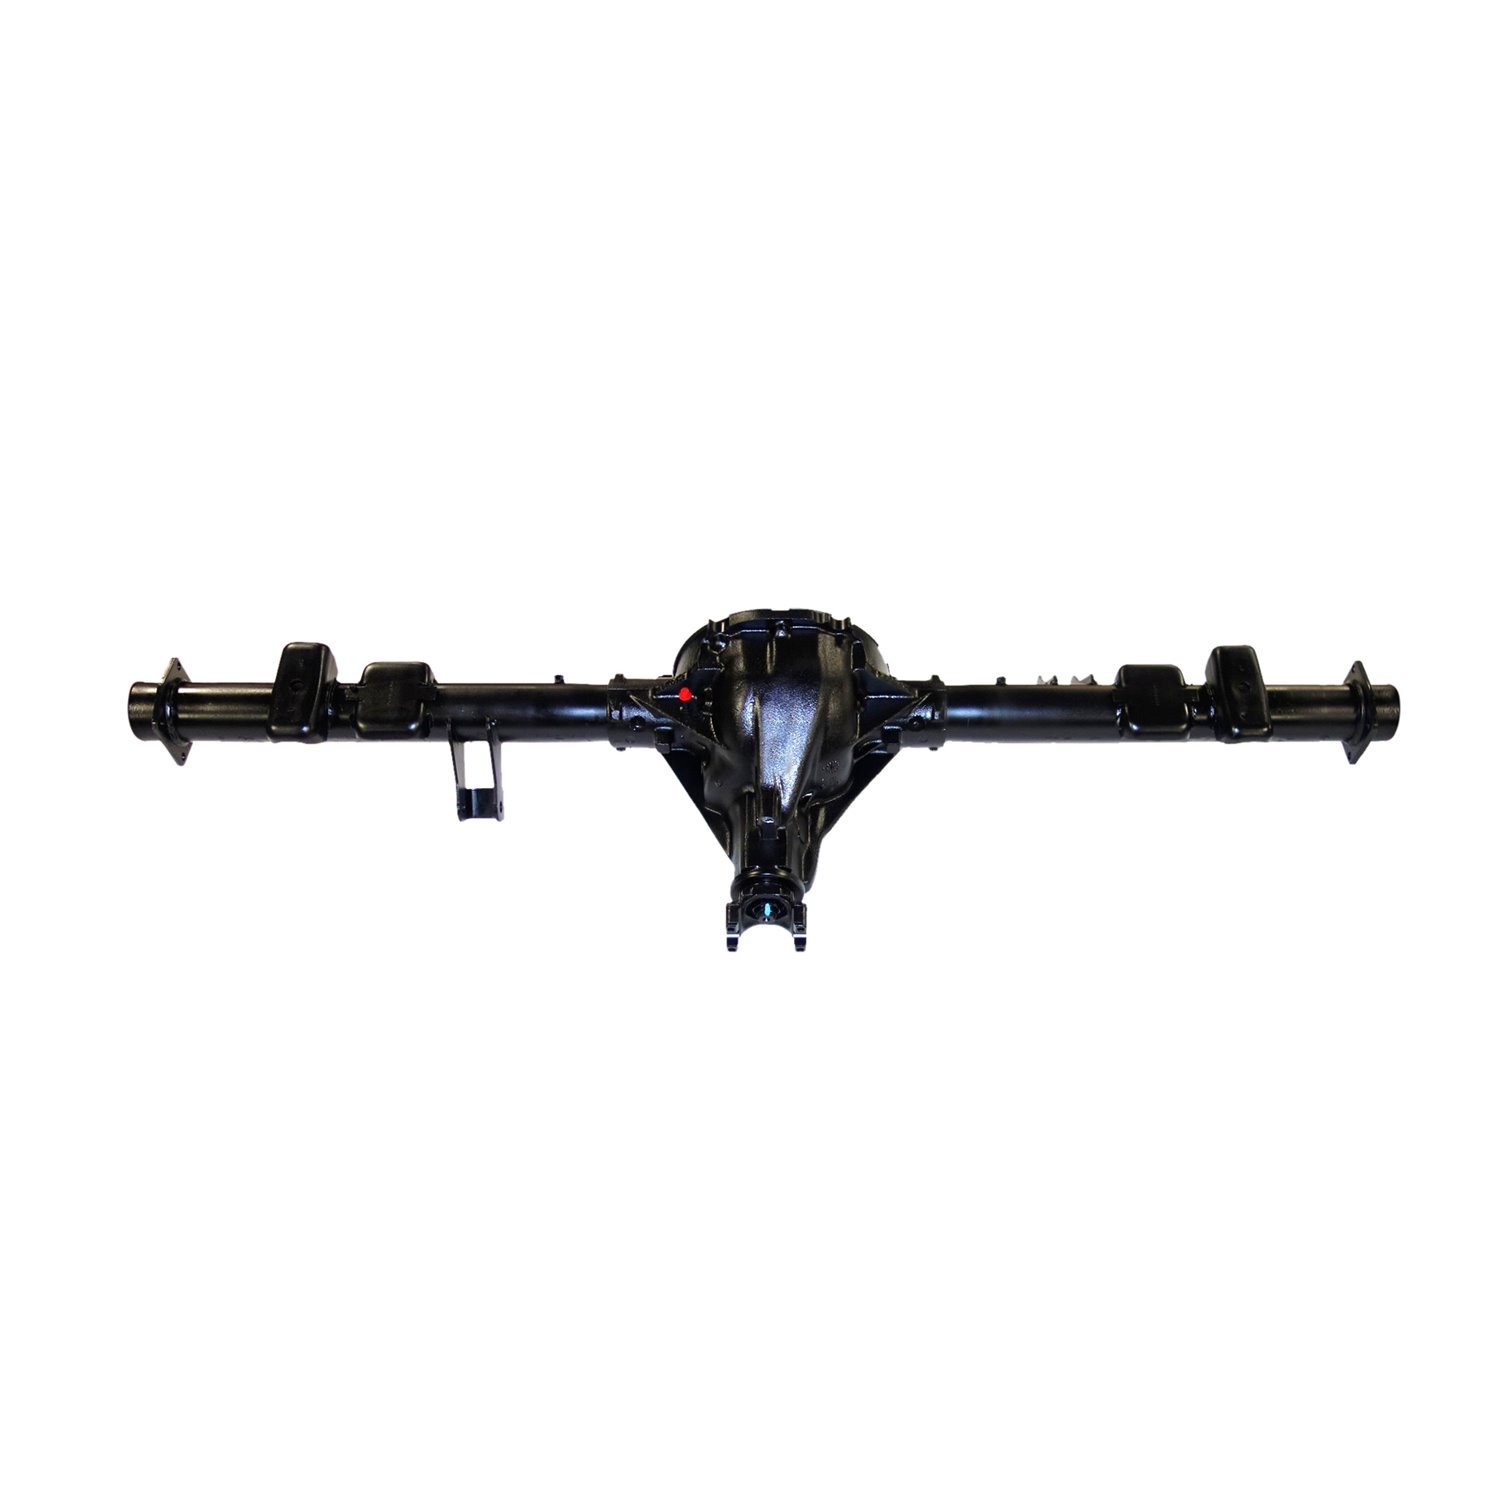 Remanufactured Complete Axle Assembly for GM 8.5" 88-99 GMC 1500 4.11 Ratio, 2wd